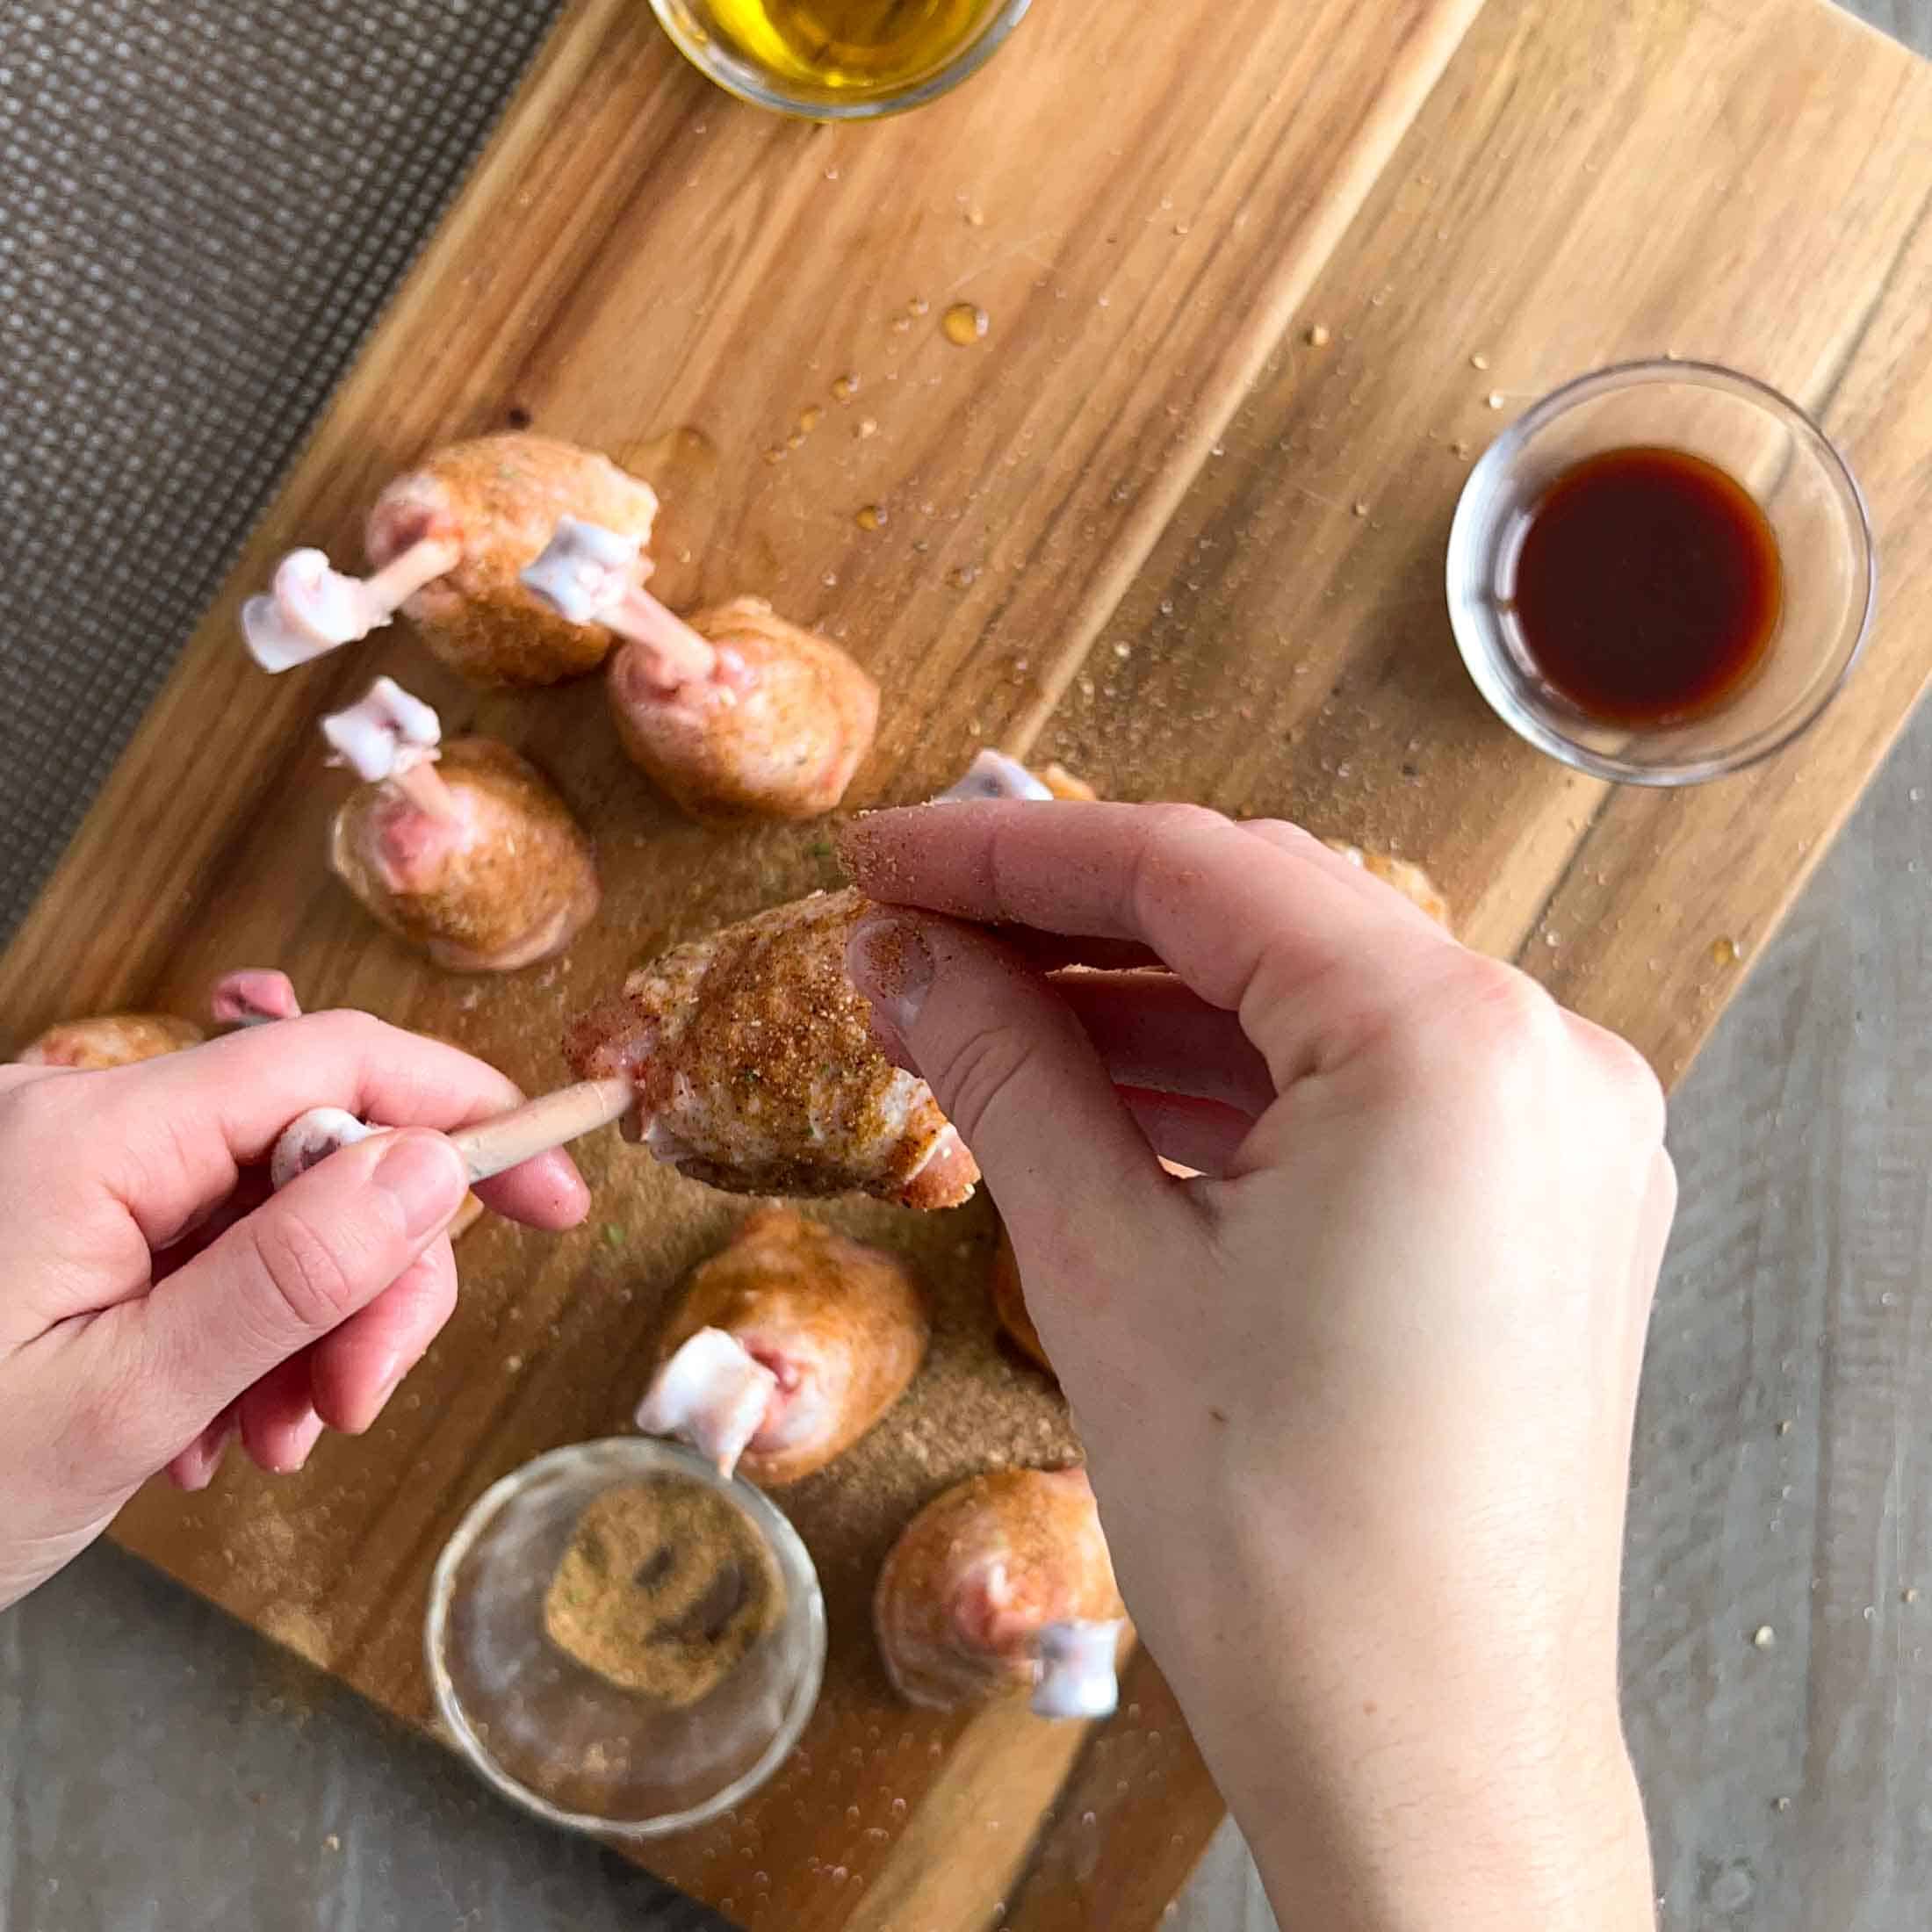 A hand sprinkling rub onto a prepared chicken lollipop before grilling.